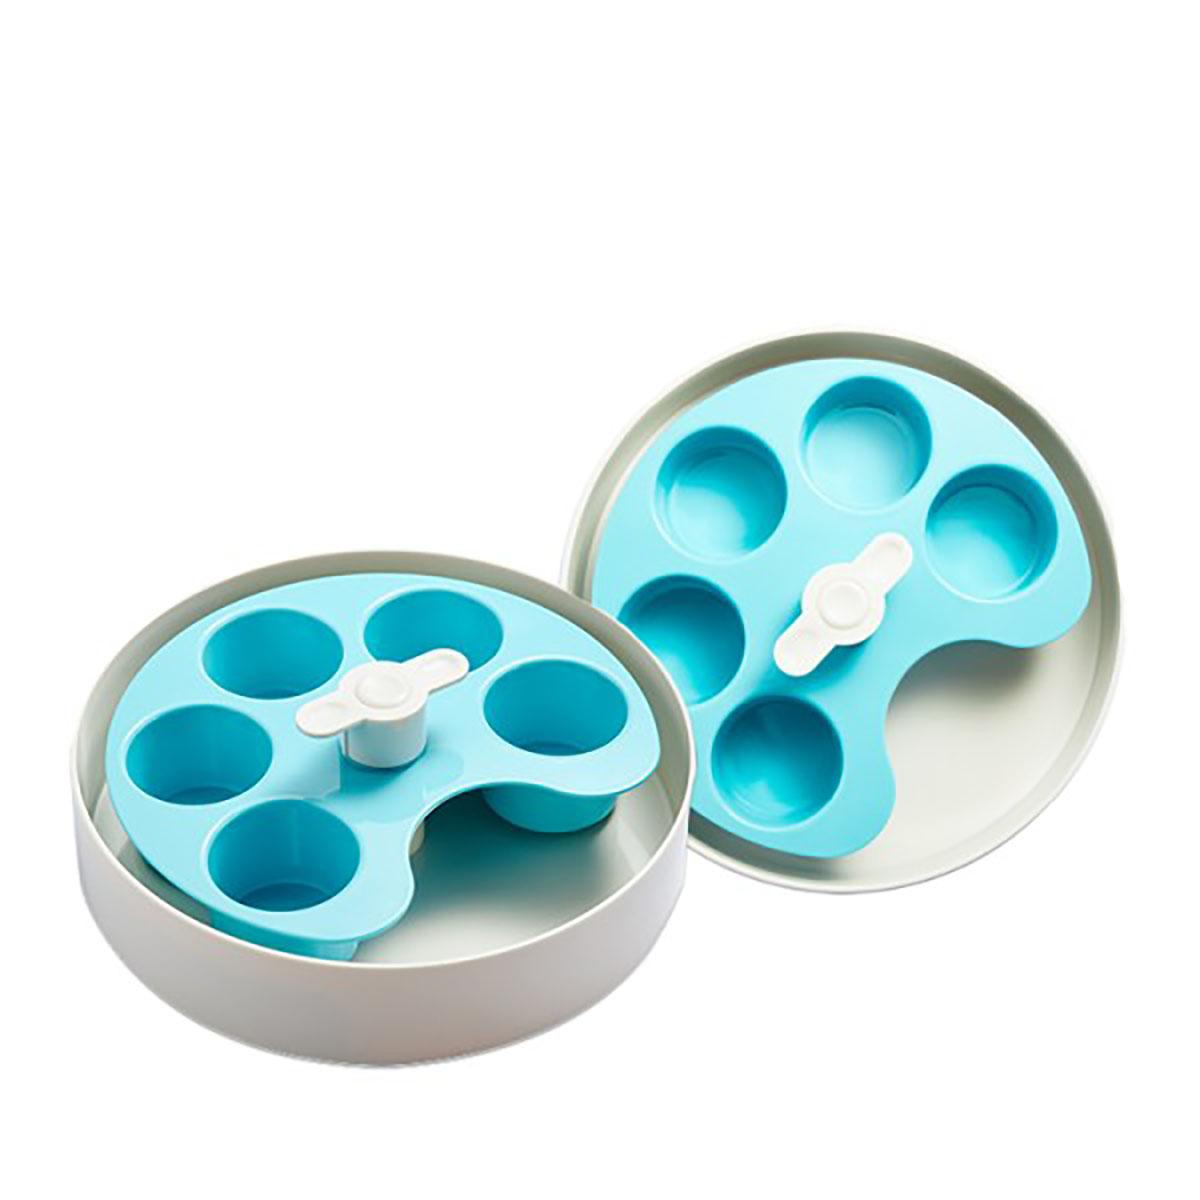 PetDreamHouse Spin Bowl Slow Feeder Dish for Dogs, Palette Blue Moderate  Level Spinning, Interactive & Adjustable Center Puzzle Piece for All Eating